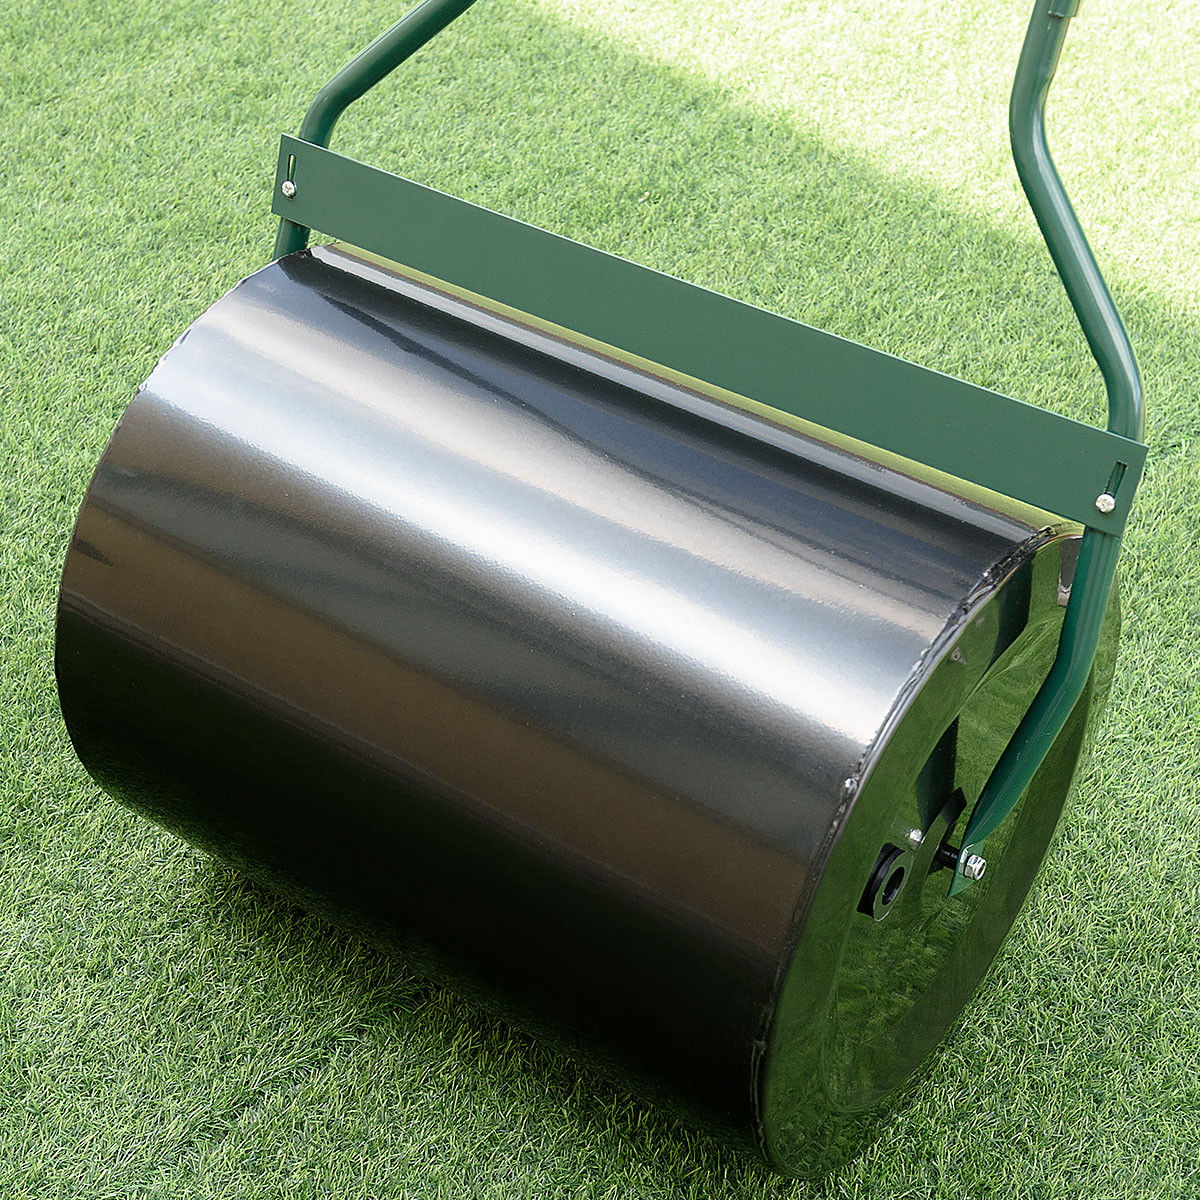 Costway 16" x 20" Lawn Roller Water or Sand Filled Push Tow Behind Roller Black 